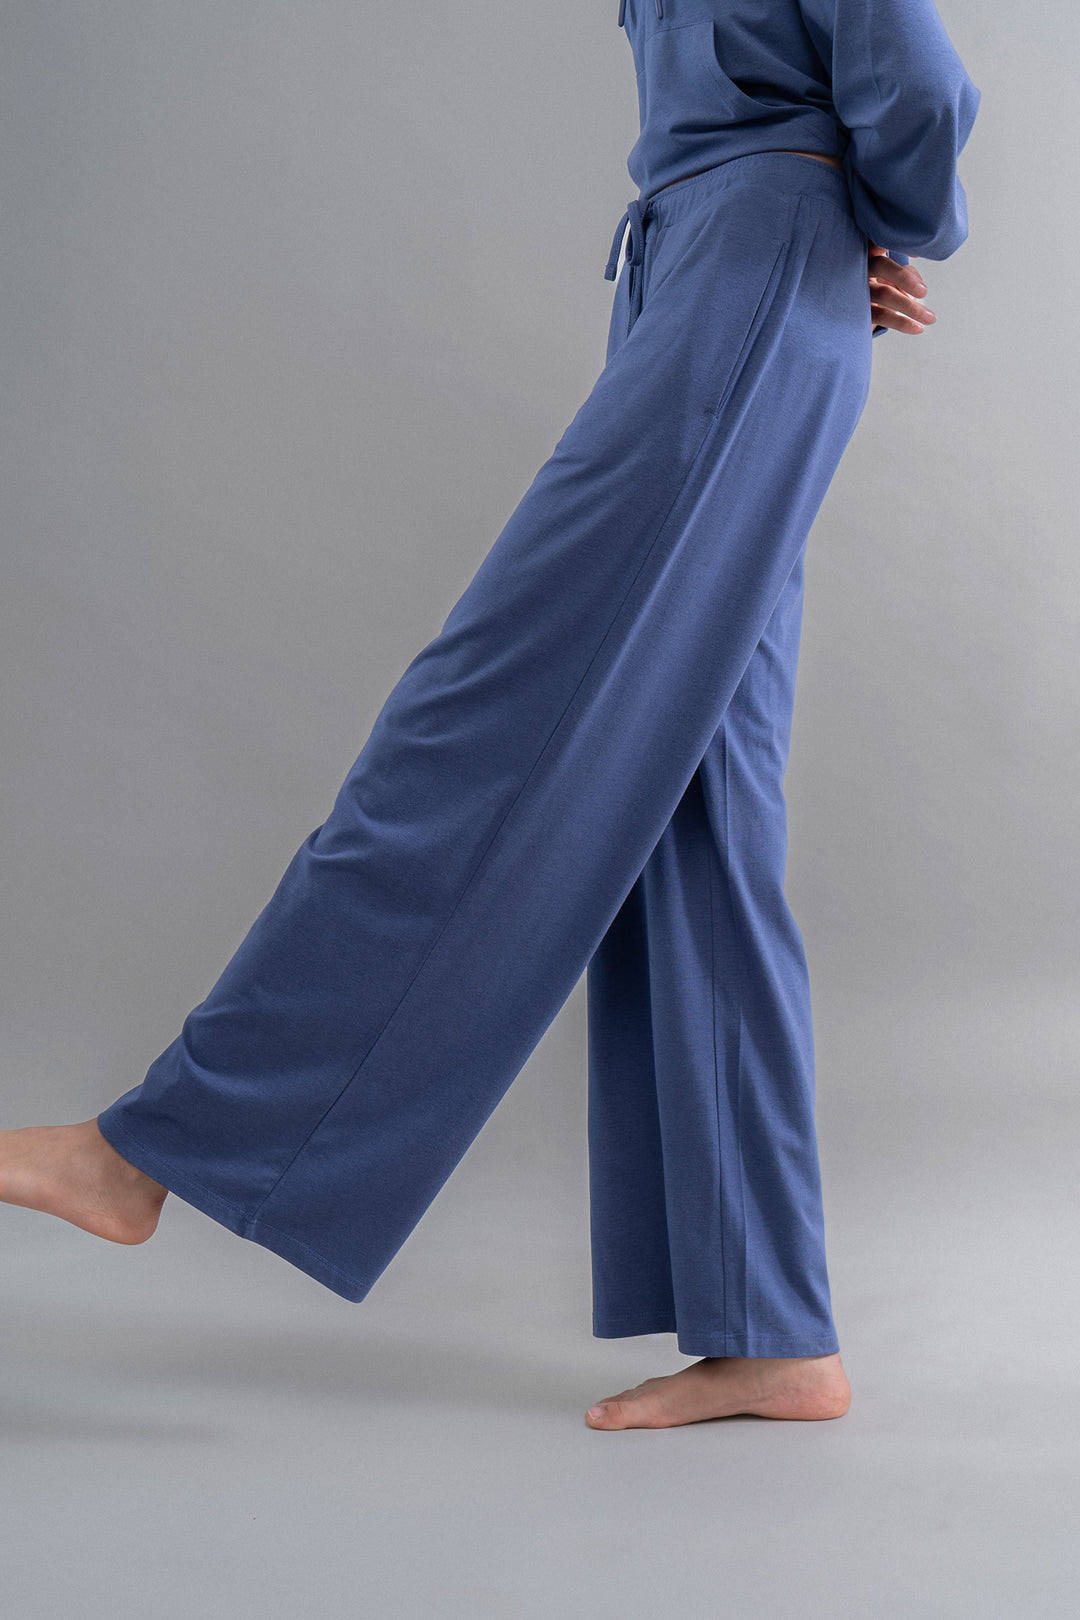 Limited Edition Luxflo® Travel Blue Flared Pajamas